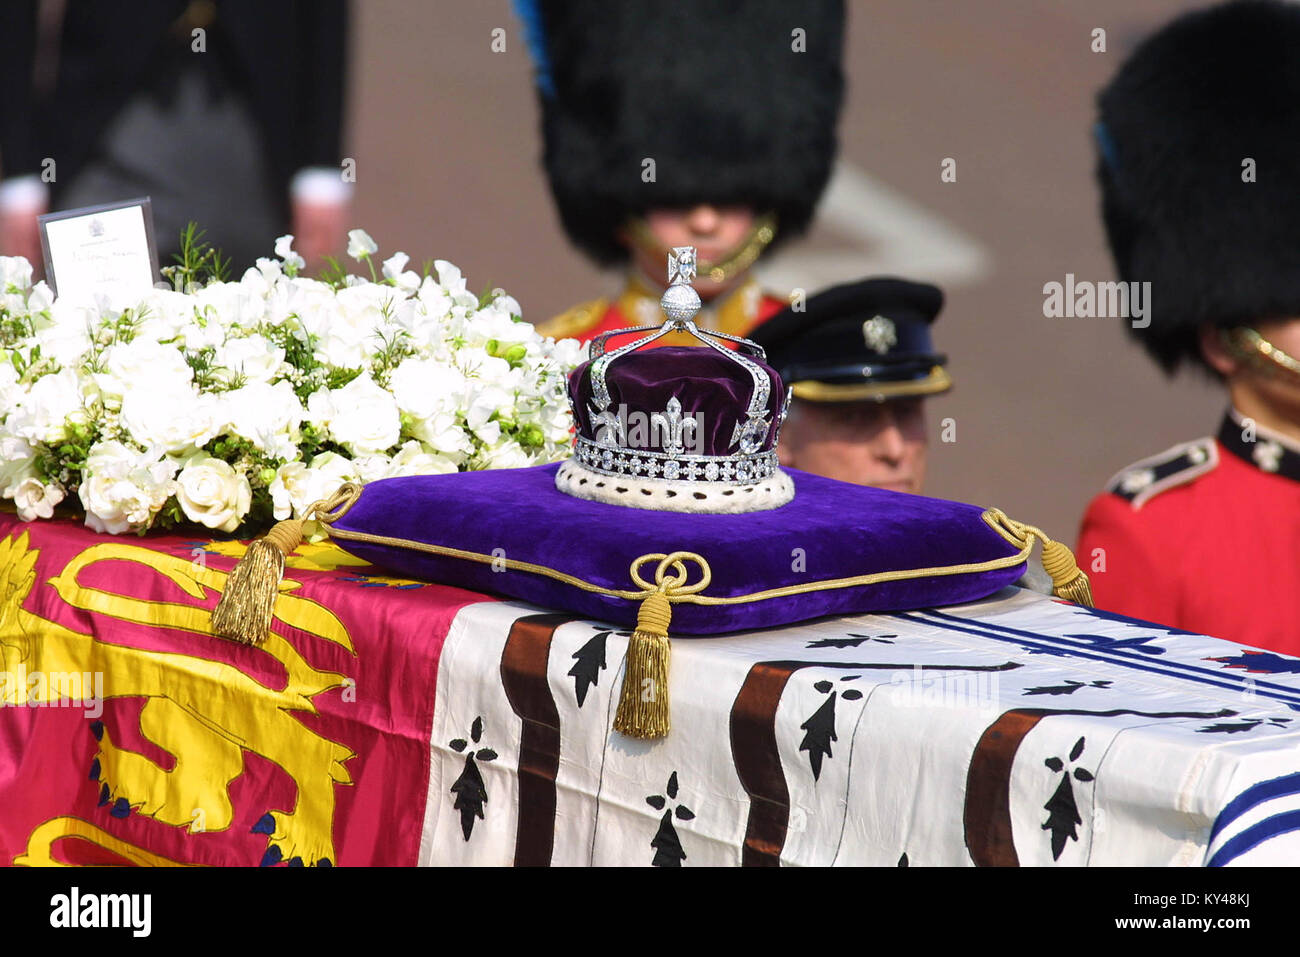 The coffin carrying the Queen Mother departs from St. James Palace, followed by members of the Royal Family. Stock Photo